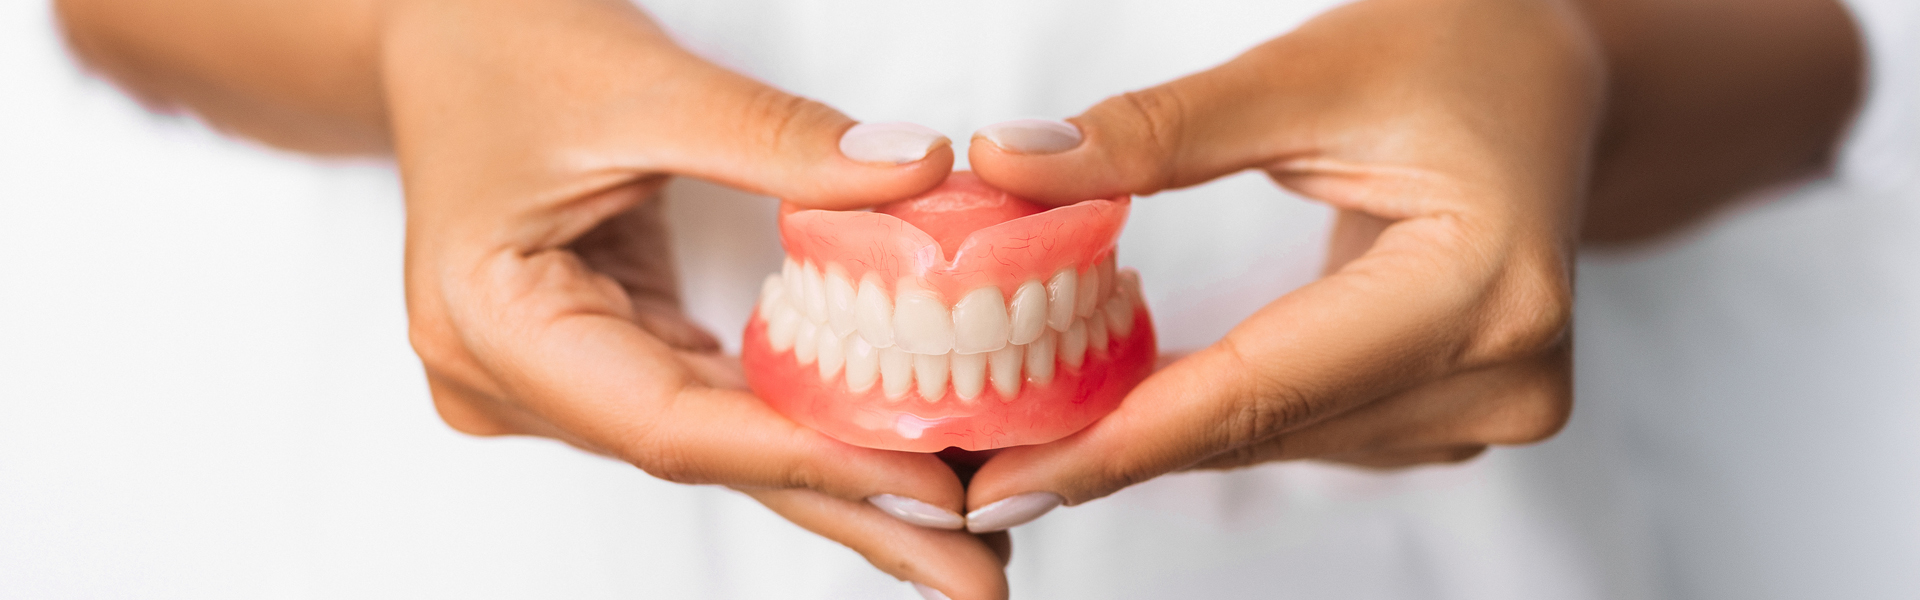 A Step-by-Step Guide for Getting Dentures